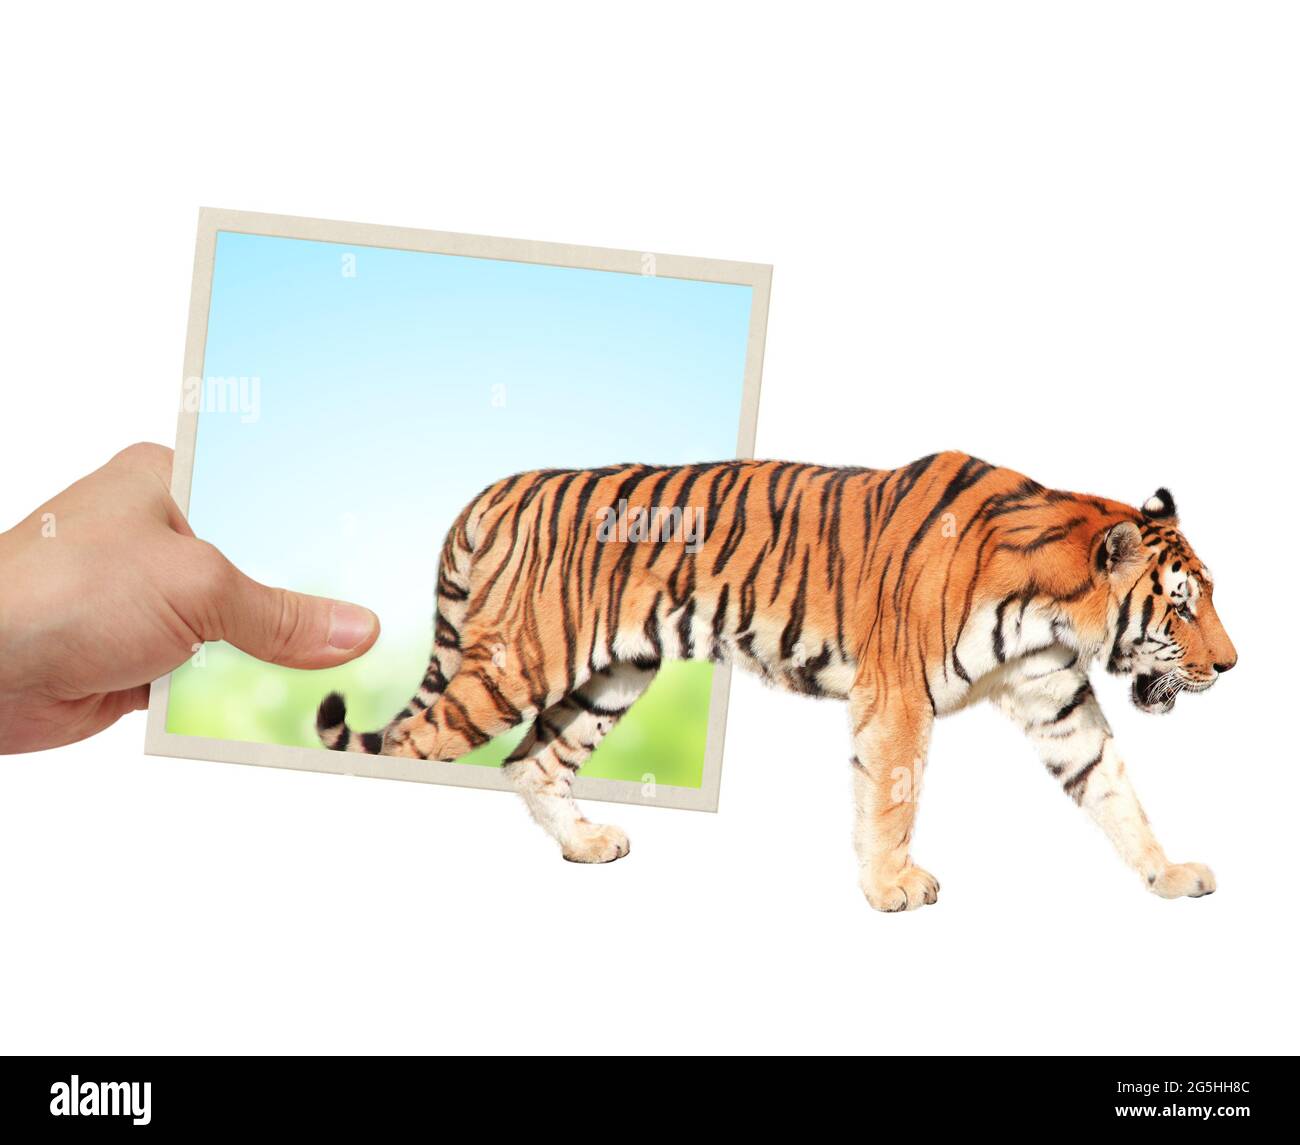 Human hand holds a photograph with tiger emerging from photography. Opportunities, nature and ecology concepts. Asian tiger walking through photo fram Stock Photo